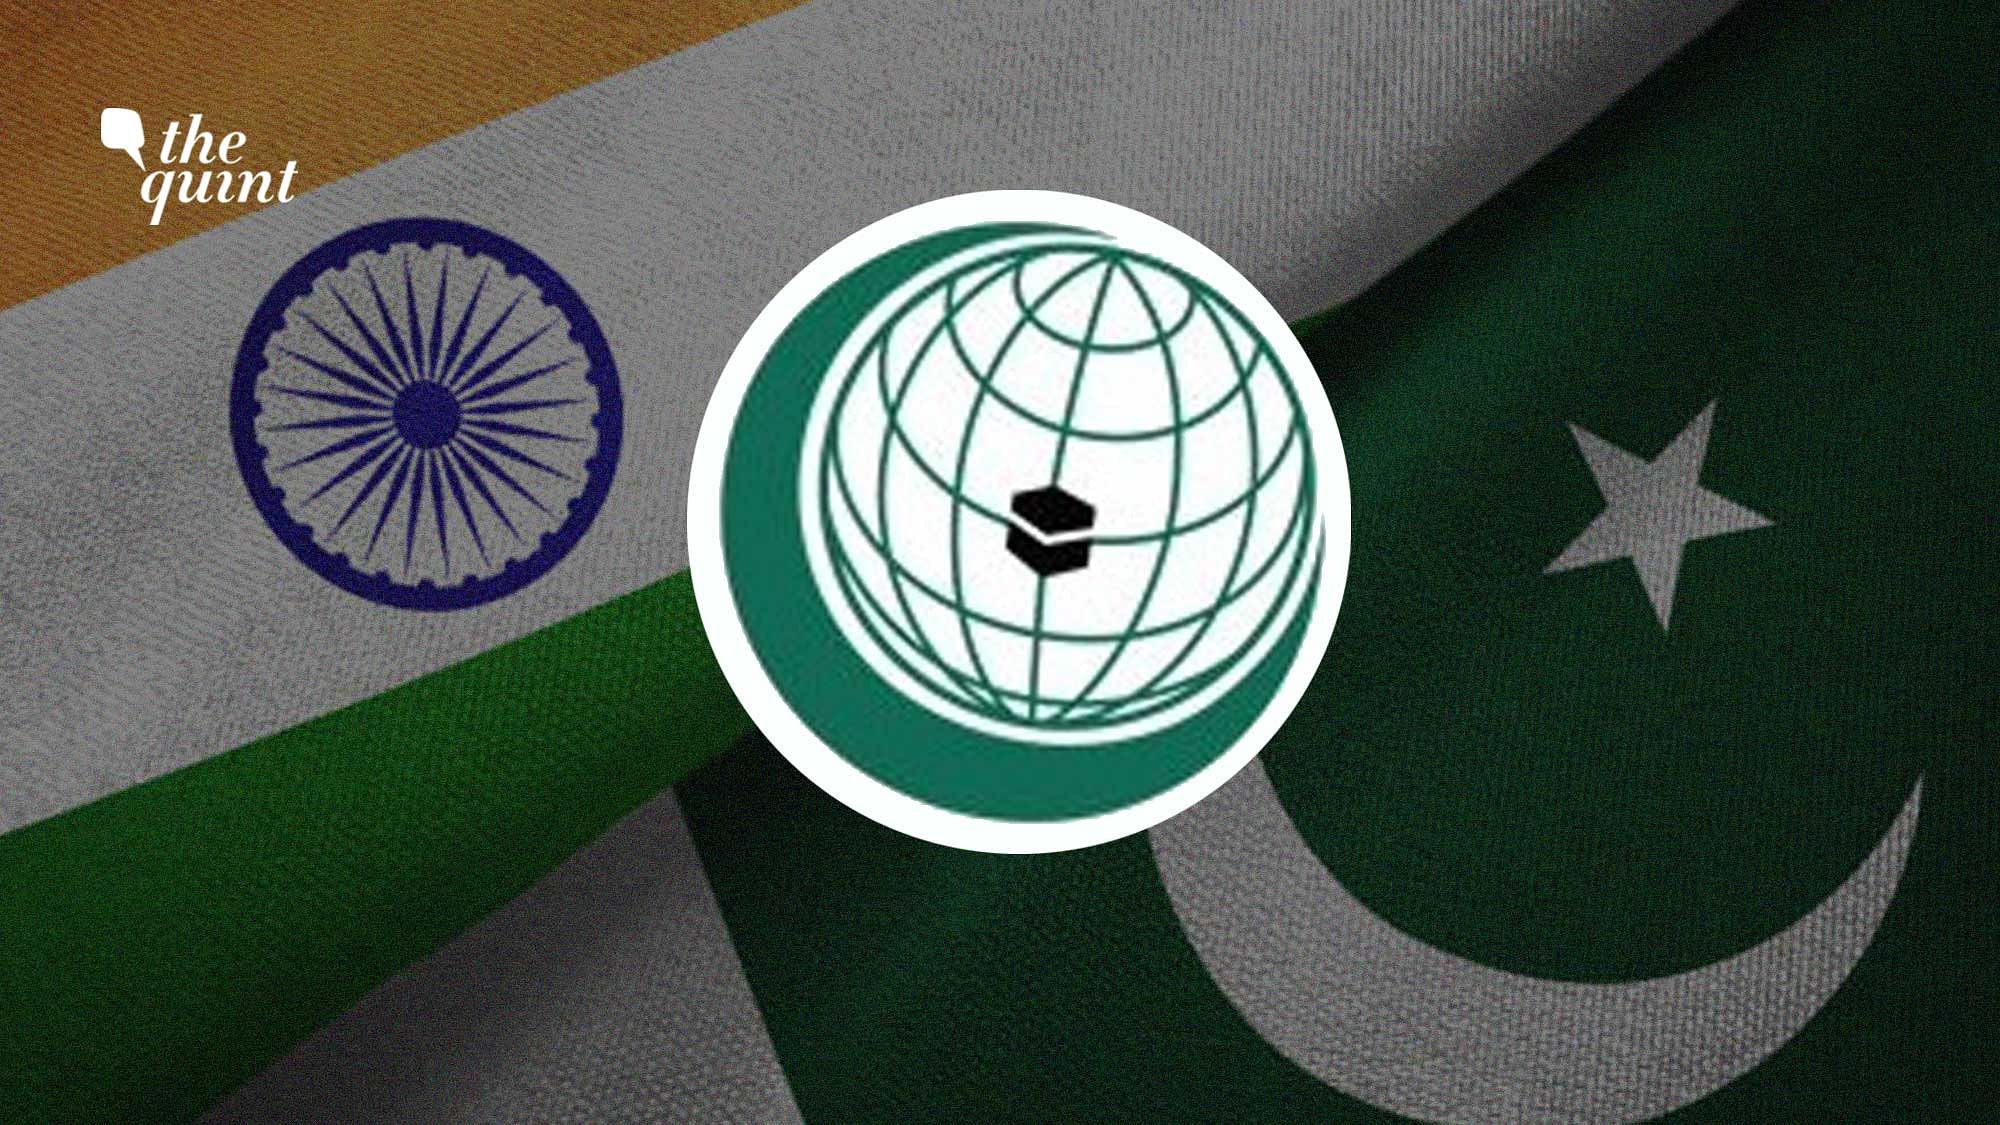 Image of OIC symbol, and India and Pakistan flags used for representational purposes.